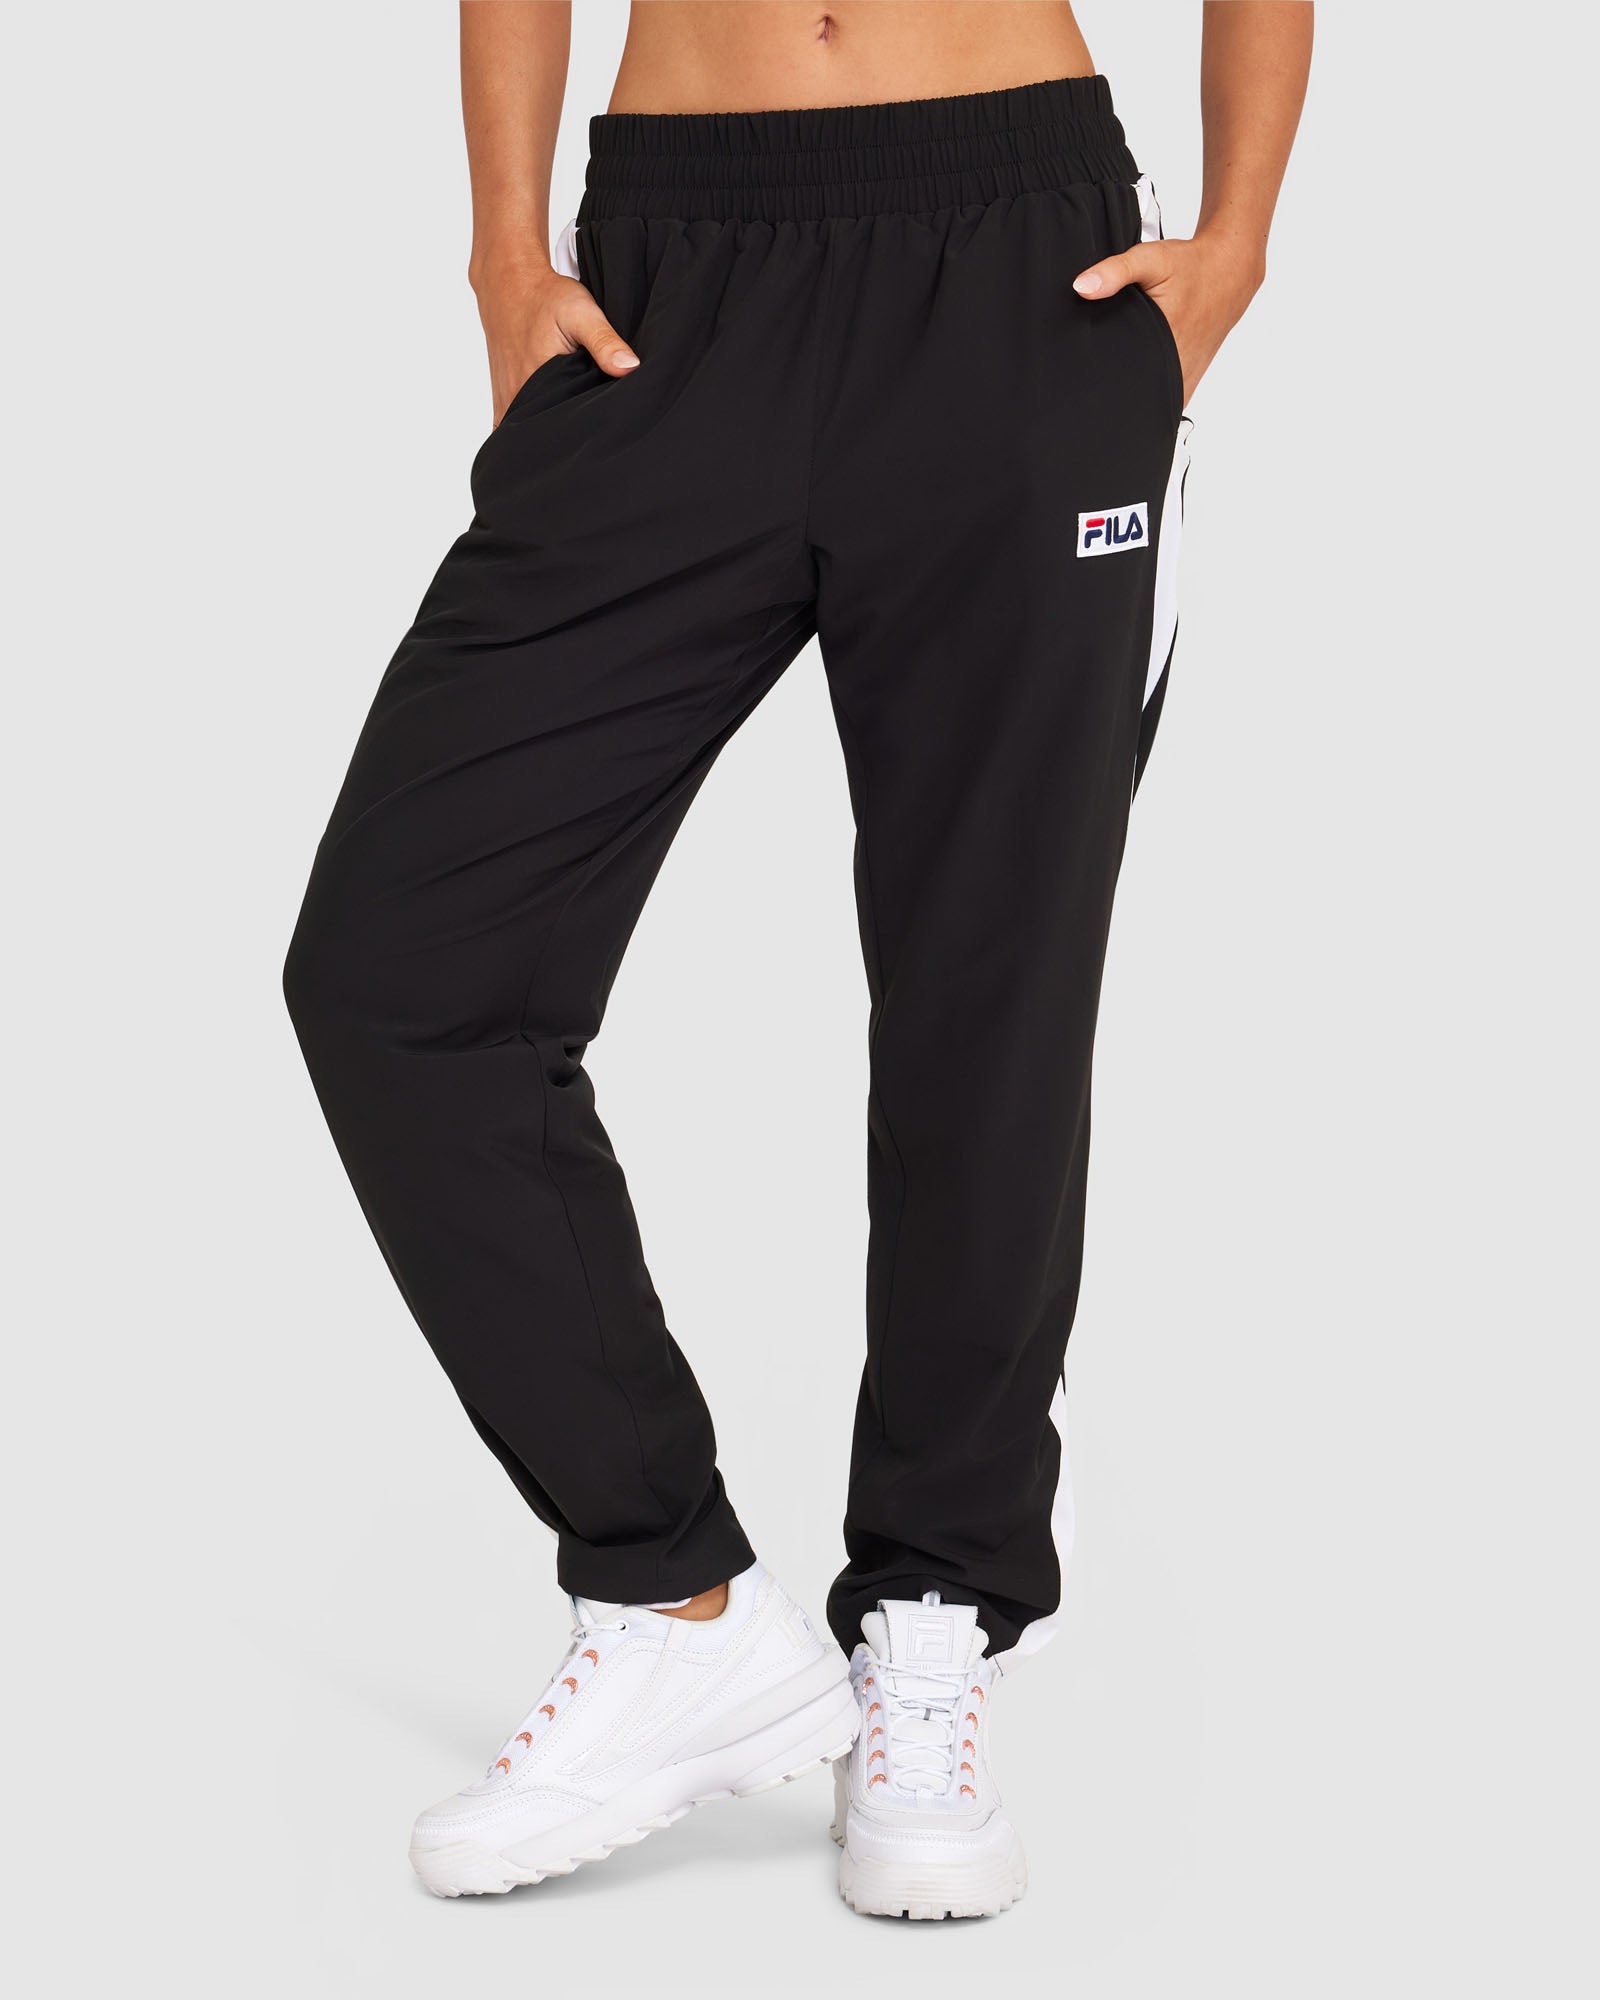 FILA Women's sweat pants - L - Blk with pockets - clothing